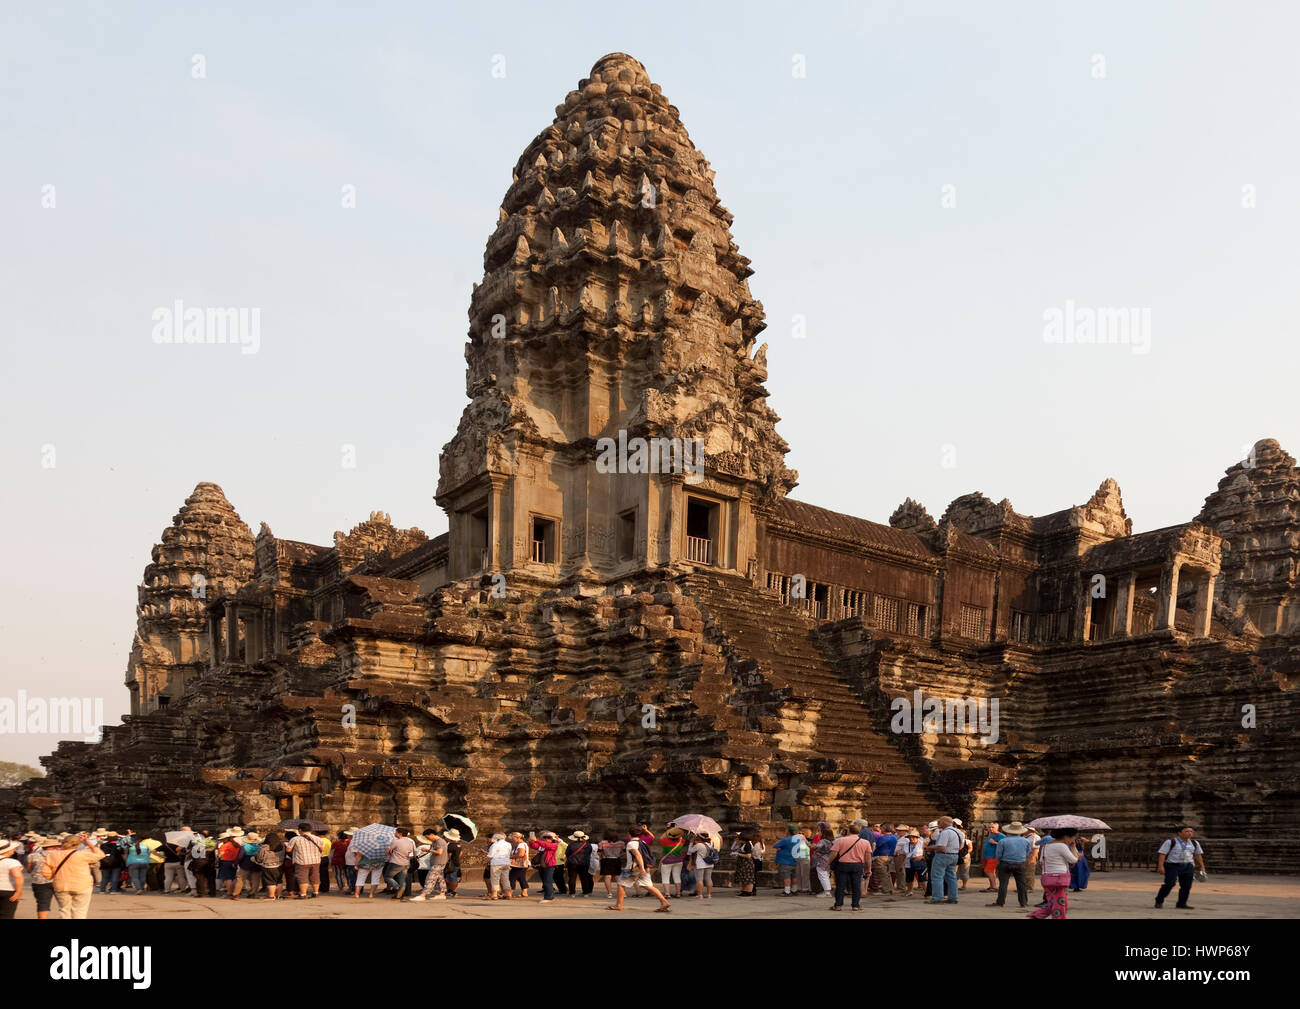 Tourists queue to climb steps to top of the temple at Angkor Wat Stock Photo